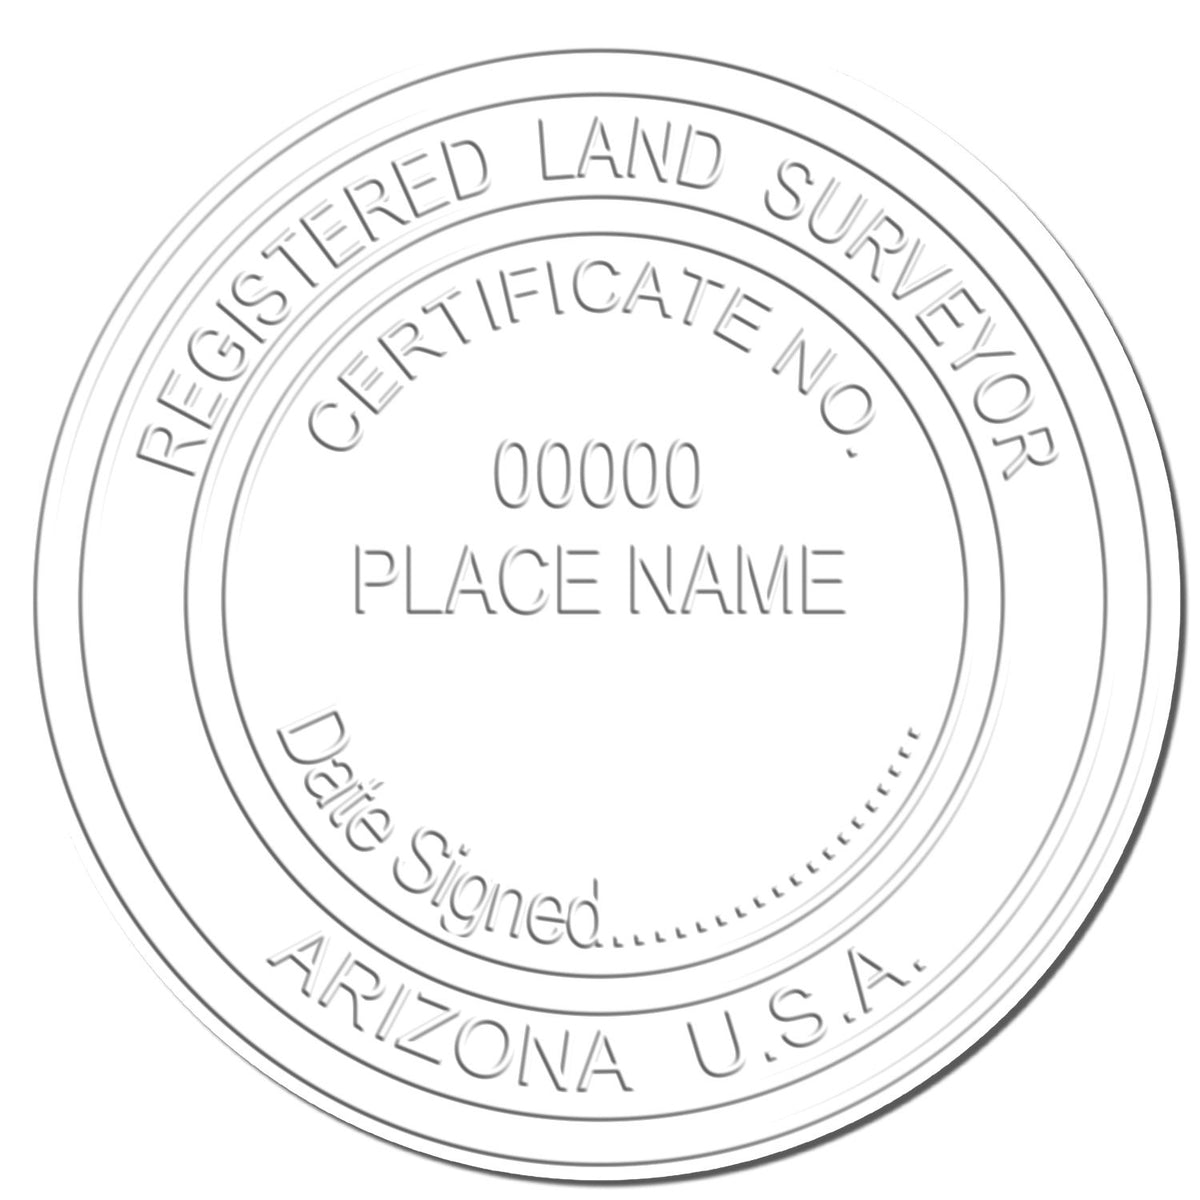 This paper is stamped with a sample imprint of the State of Arizona Soft Land Surveyor Embossing Seal, signifying its quality and reliability.